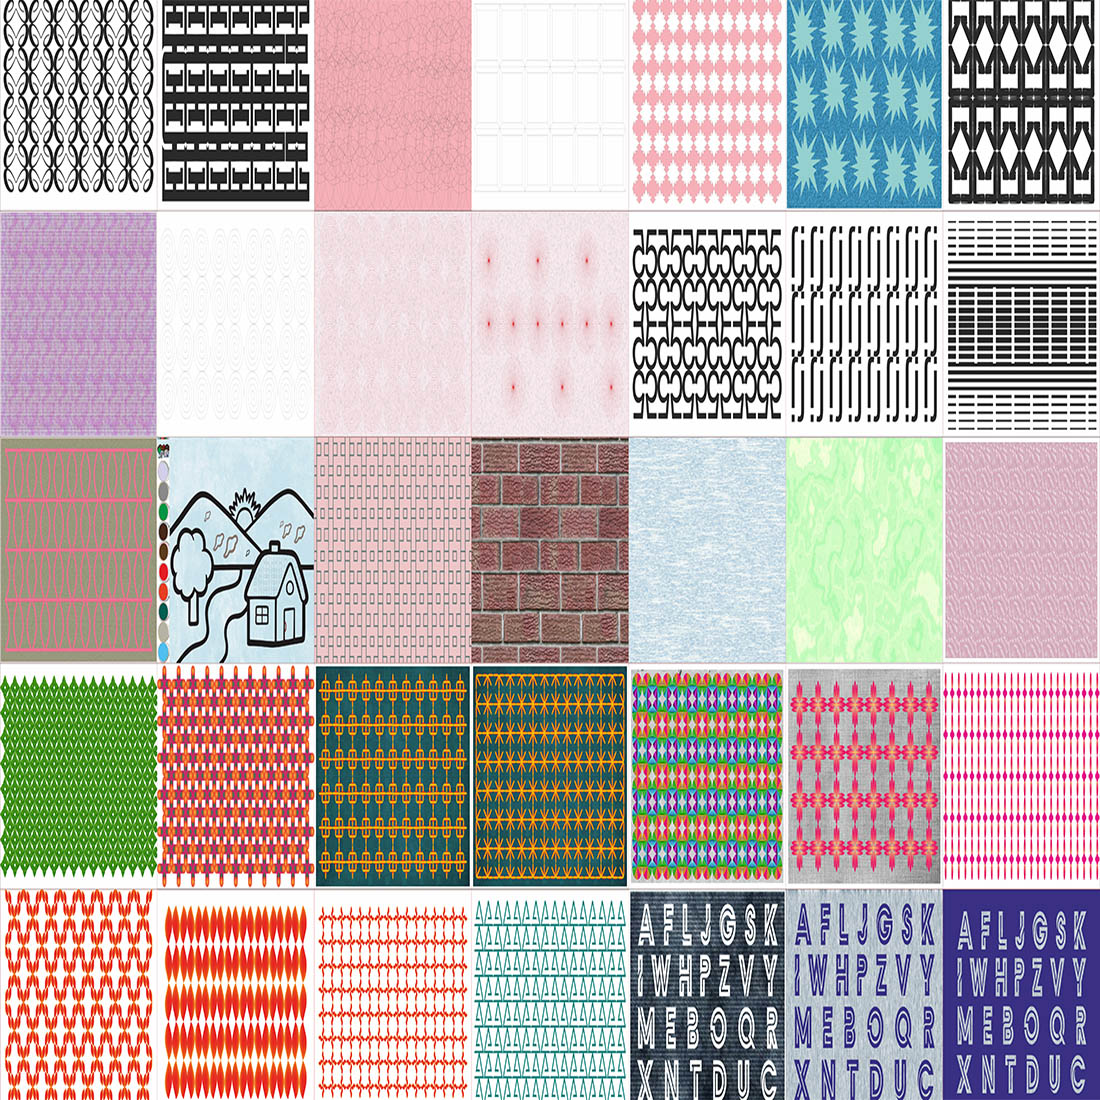 The wallpaper is Geometric Design Texture 68 file preview image.